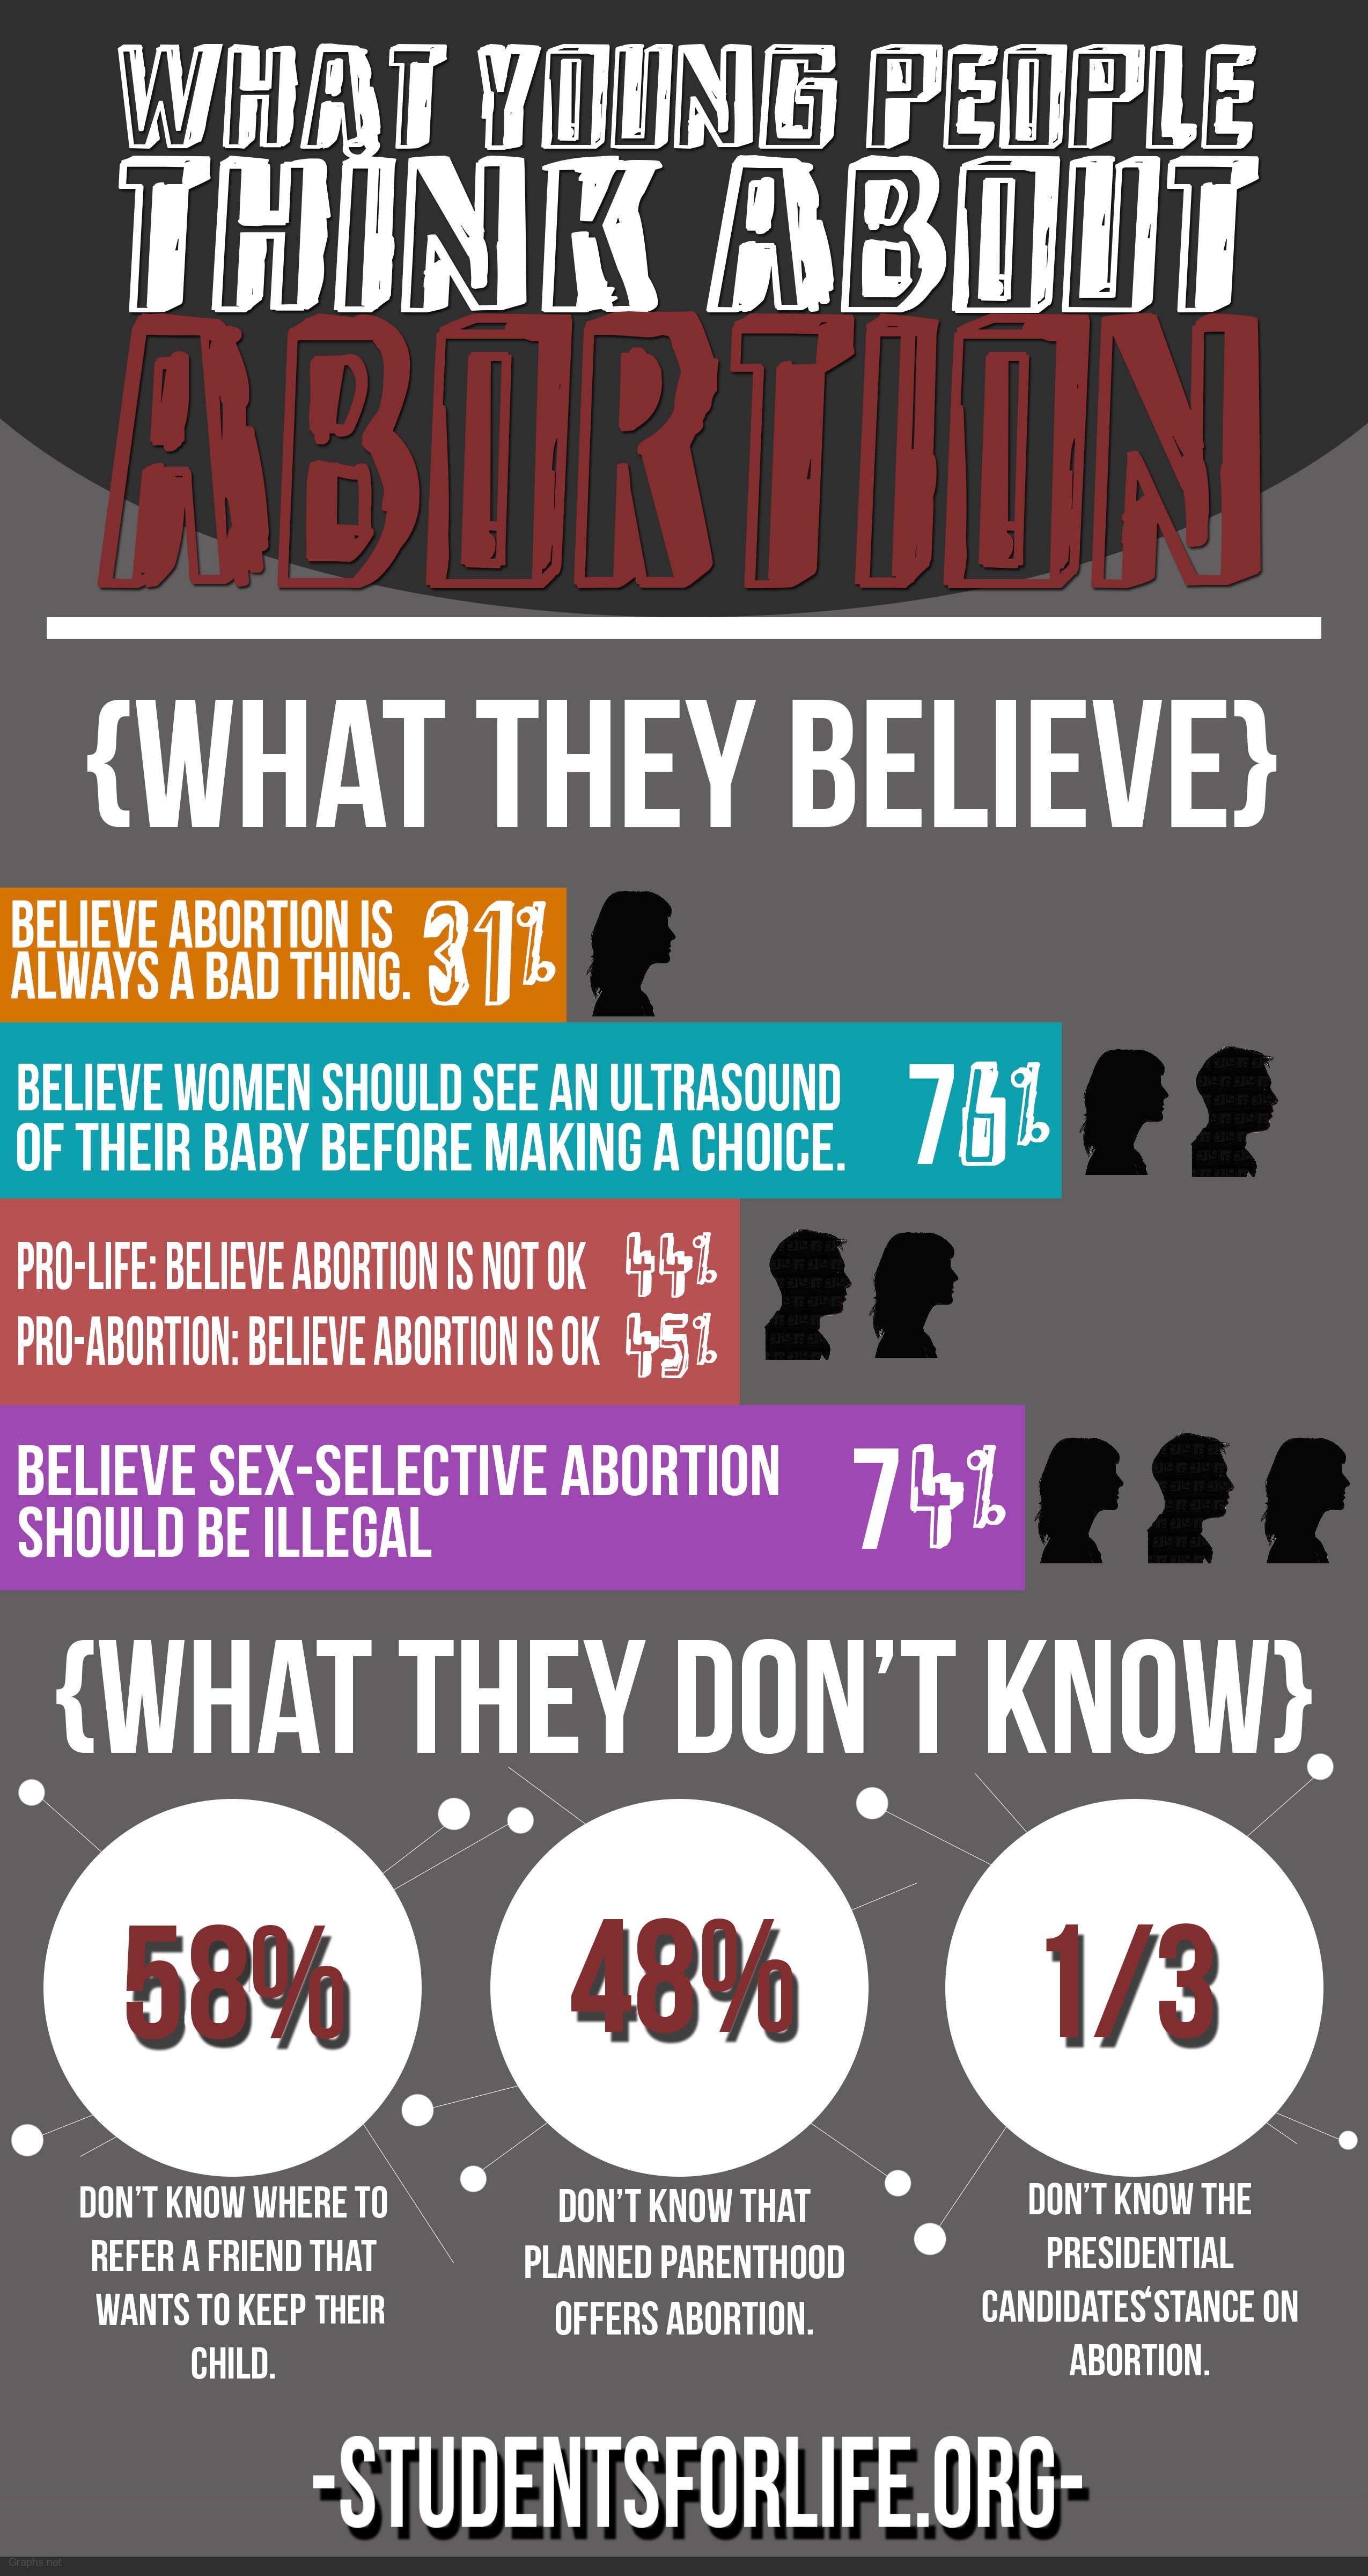 Views of young people on Abortion